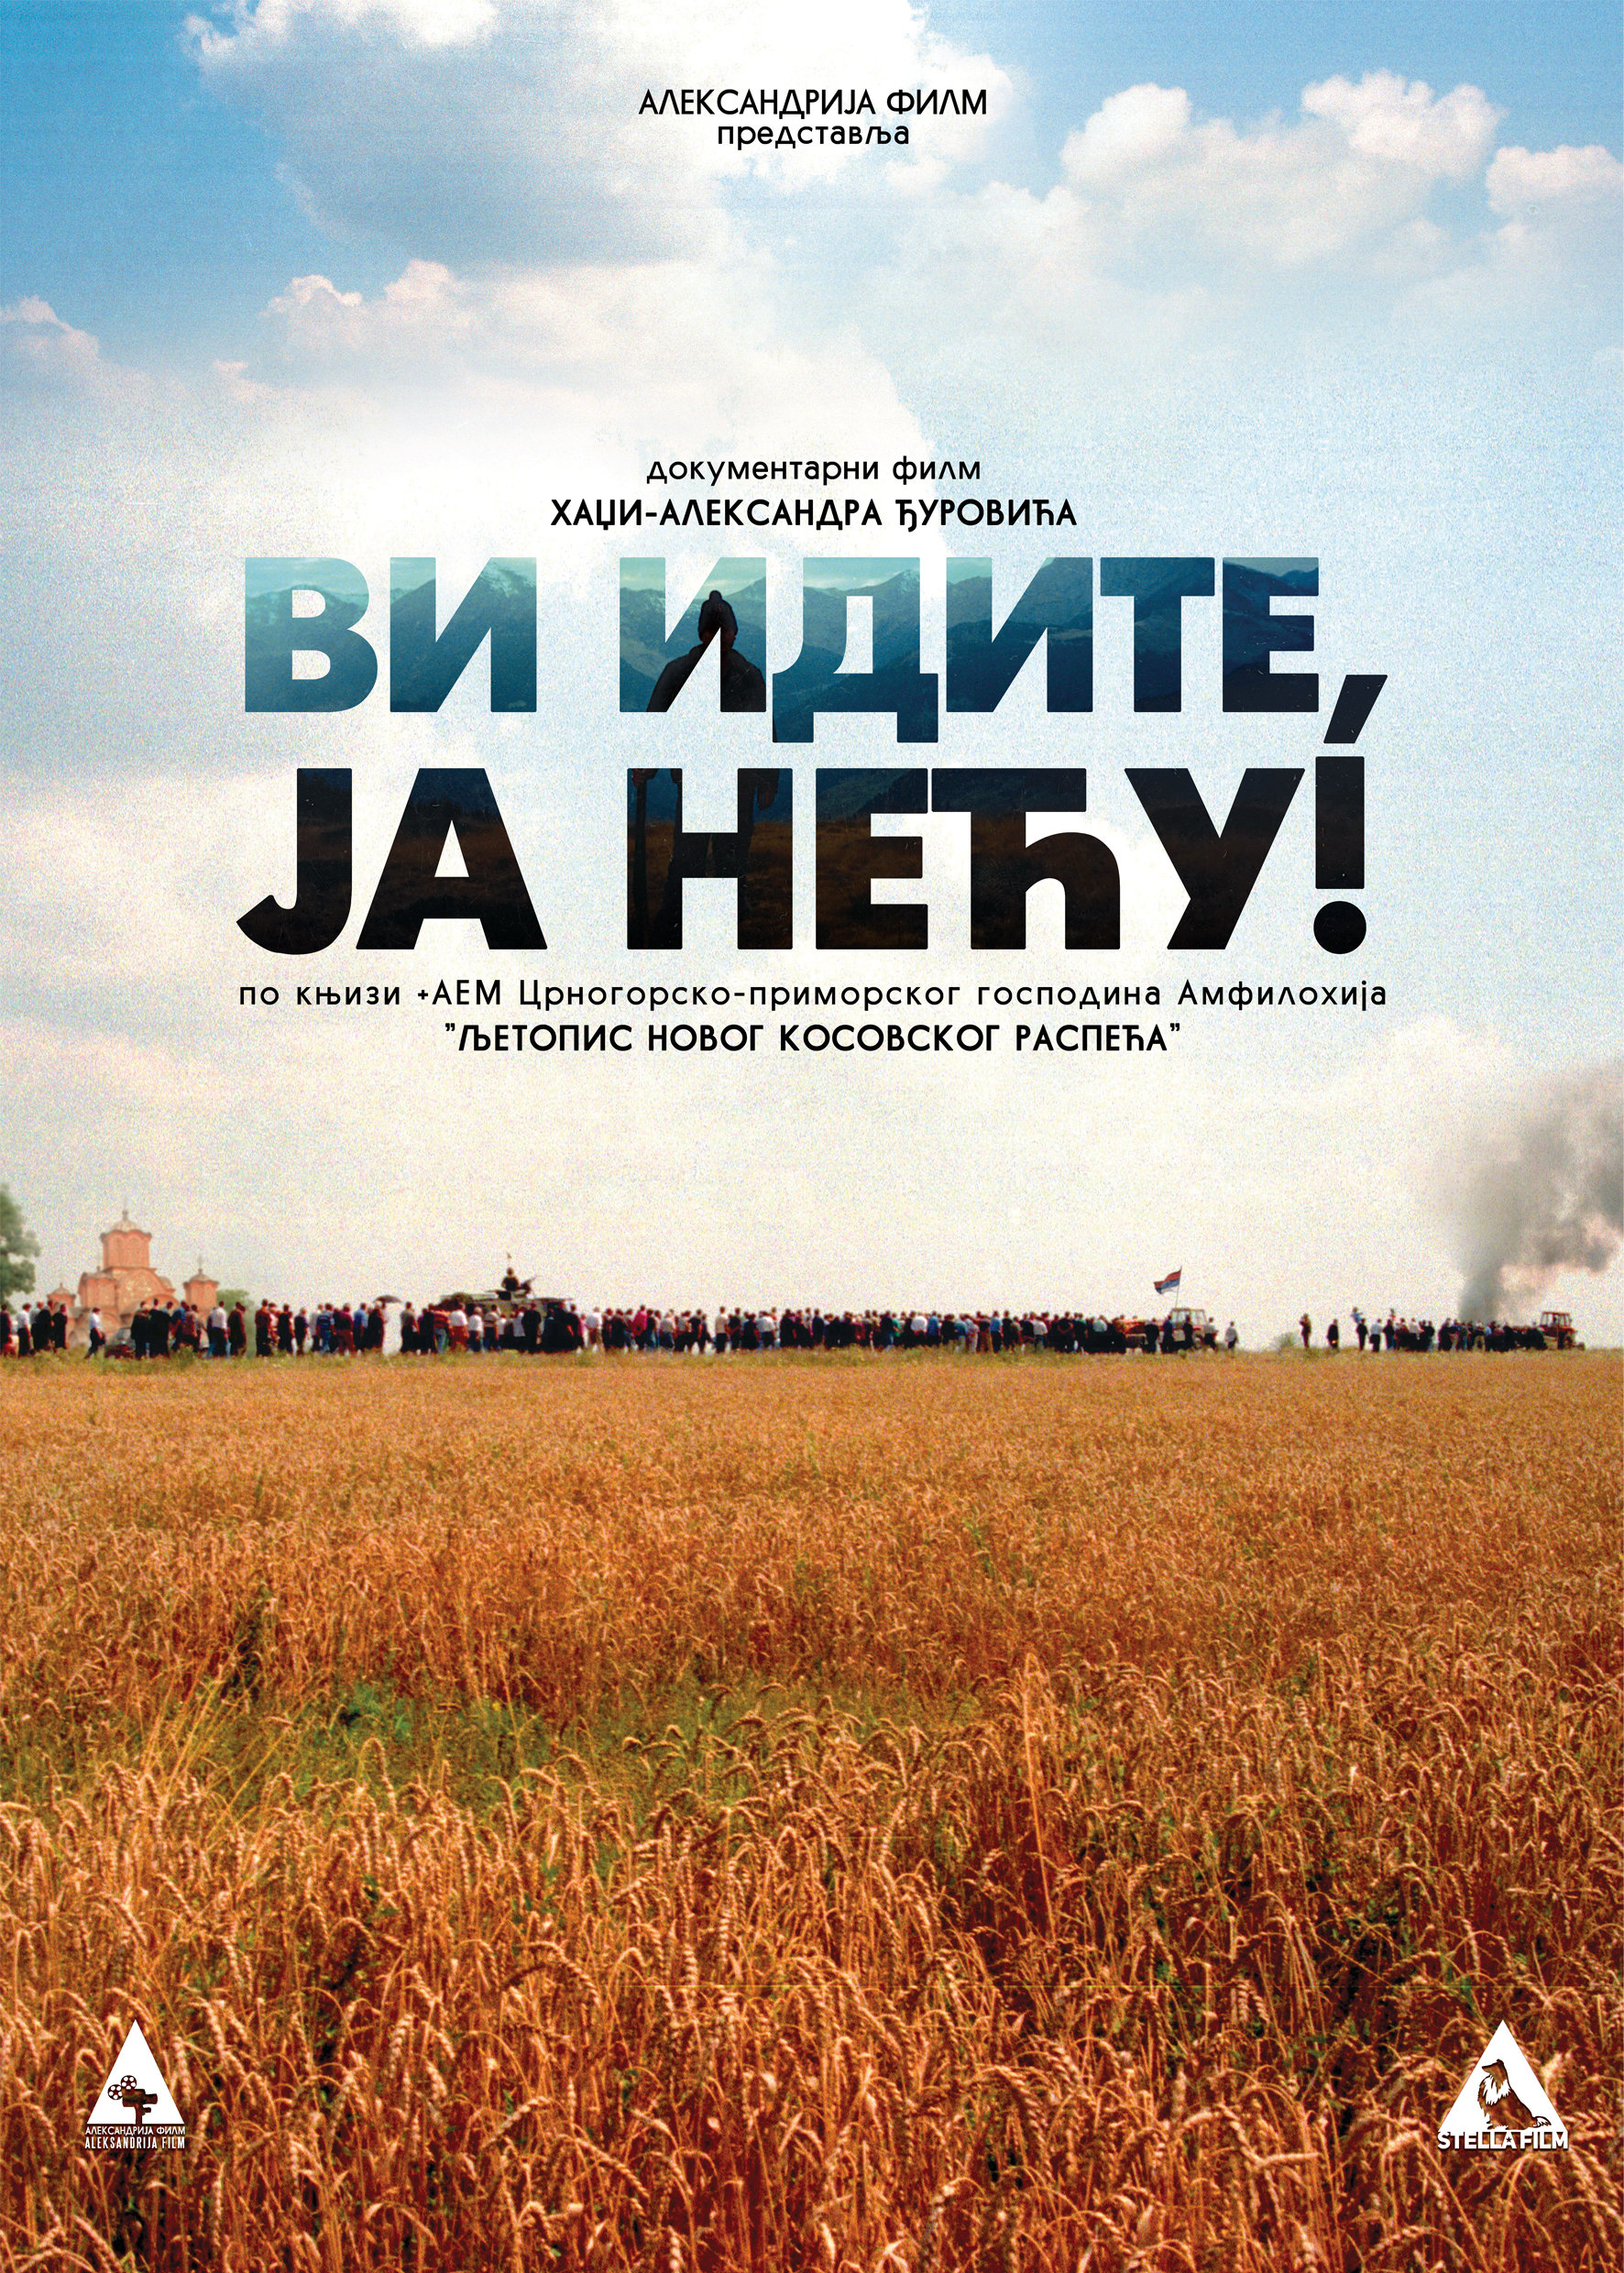 official serbian poster